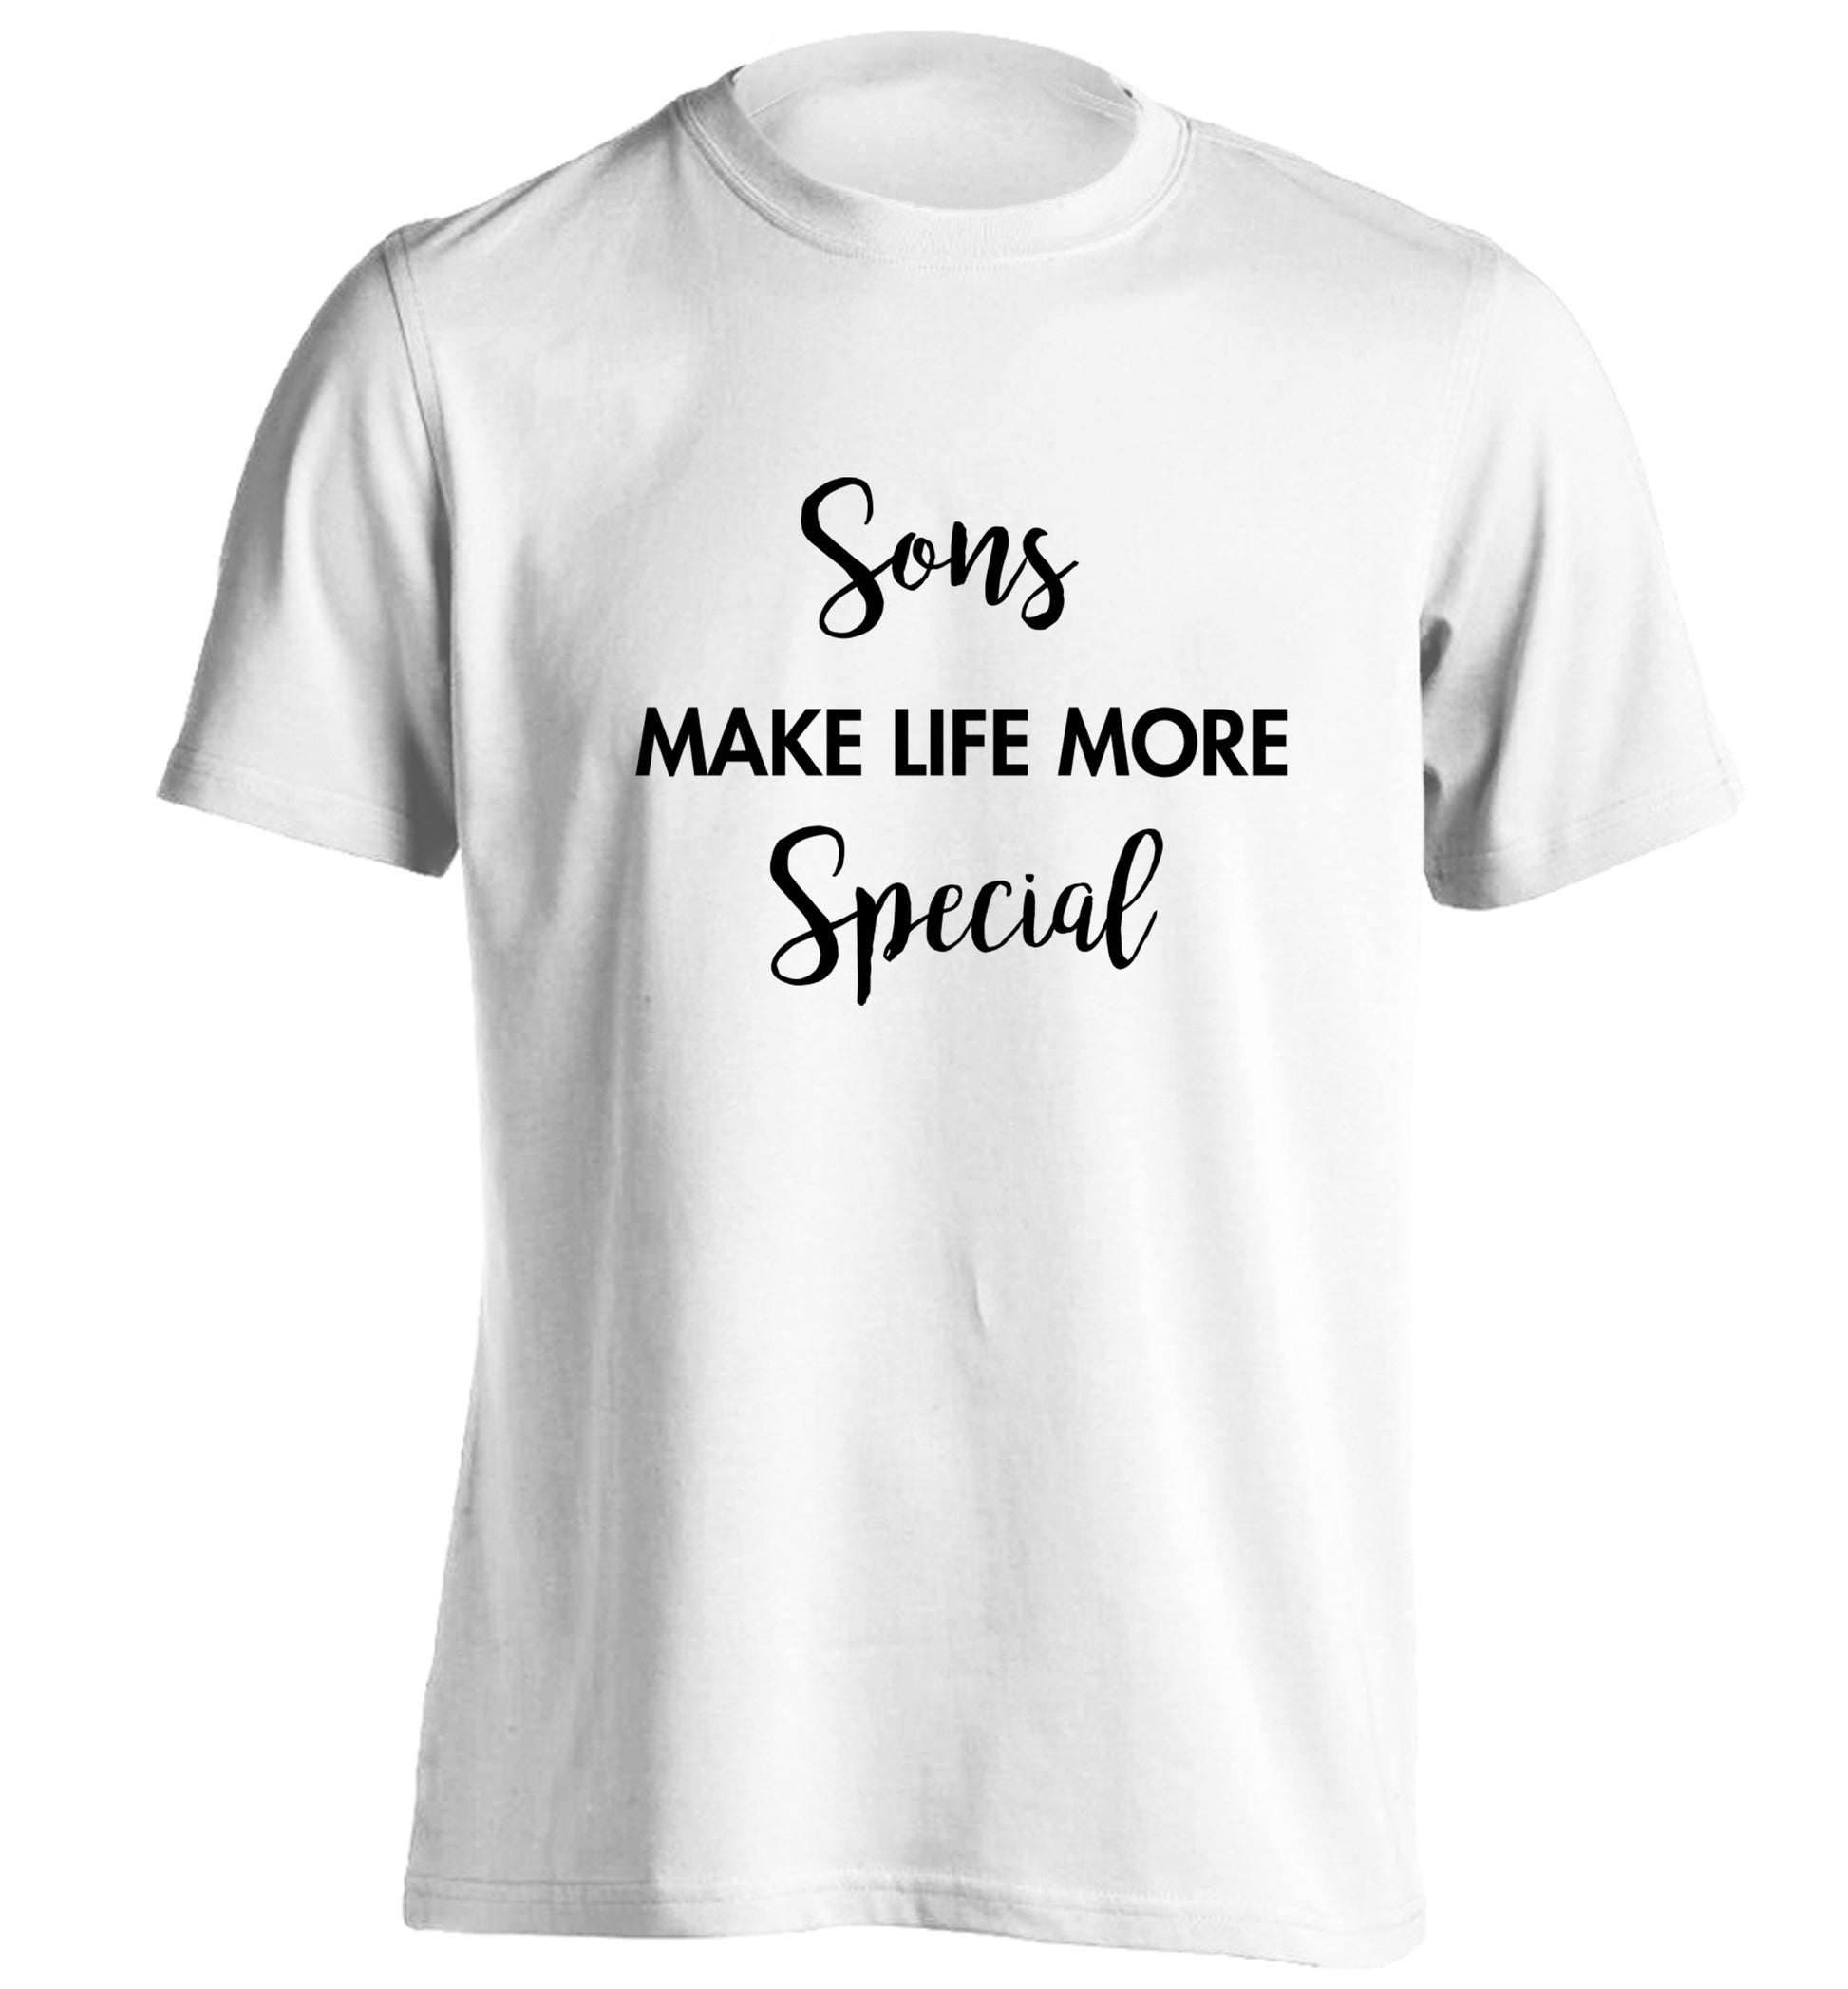 Sons make life more special adults unisex white Tshirt 2XL